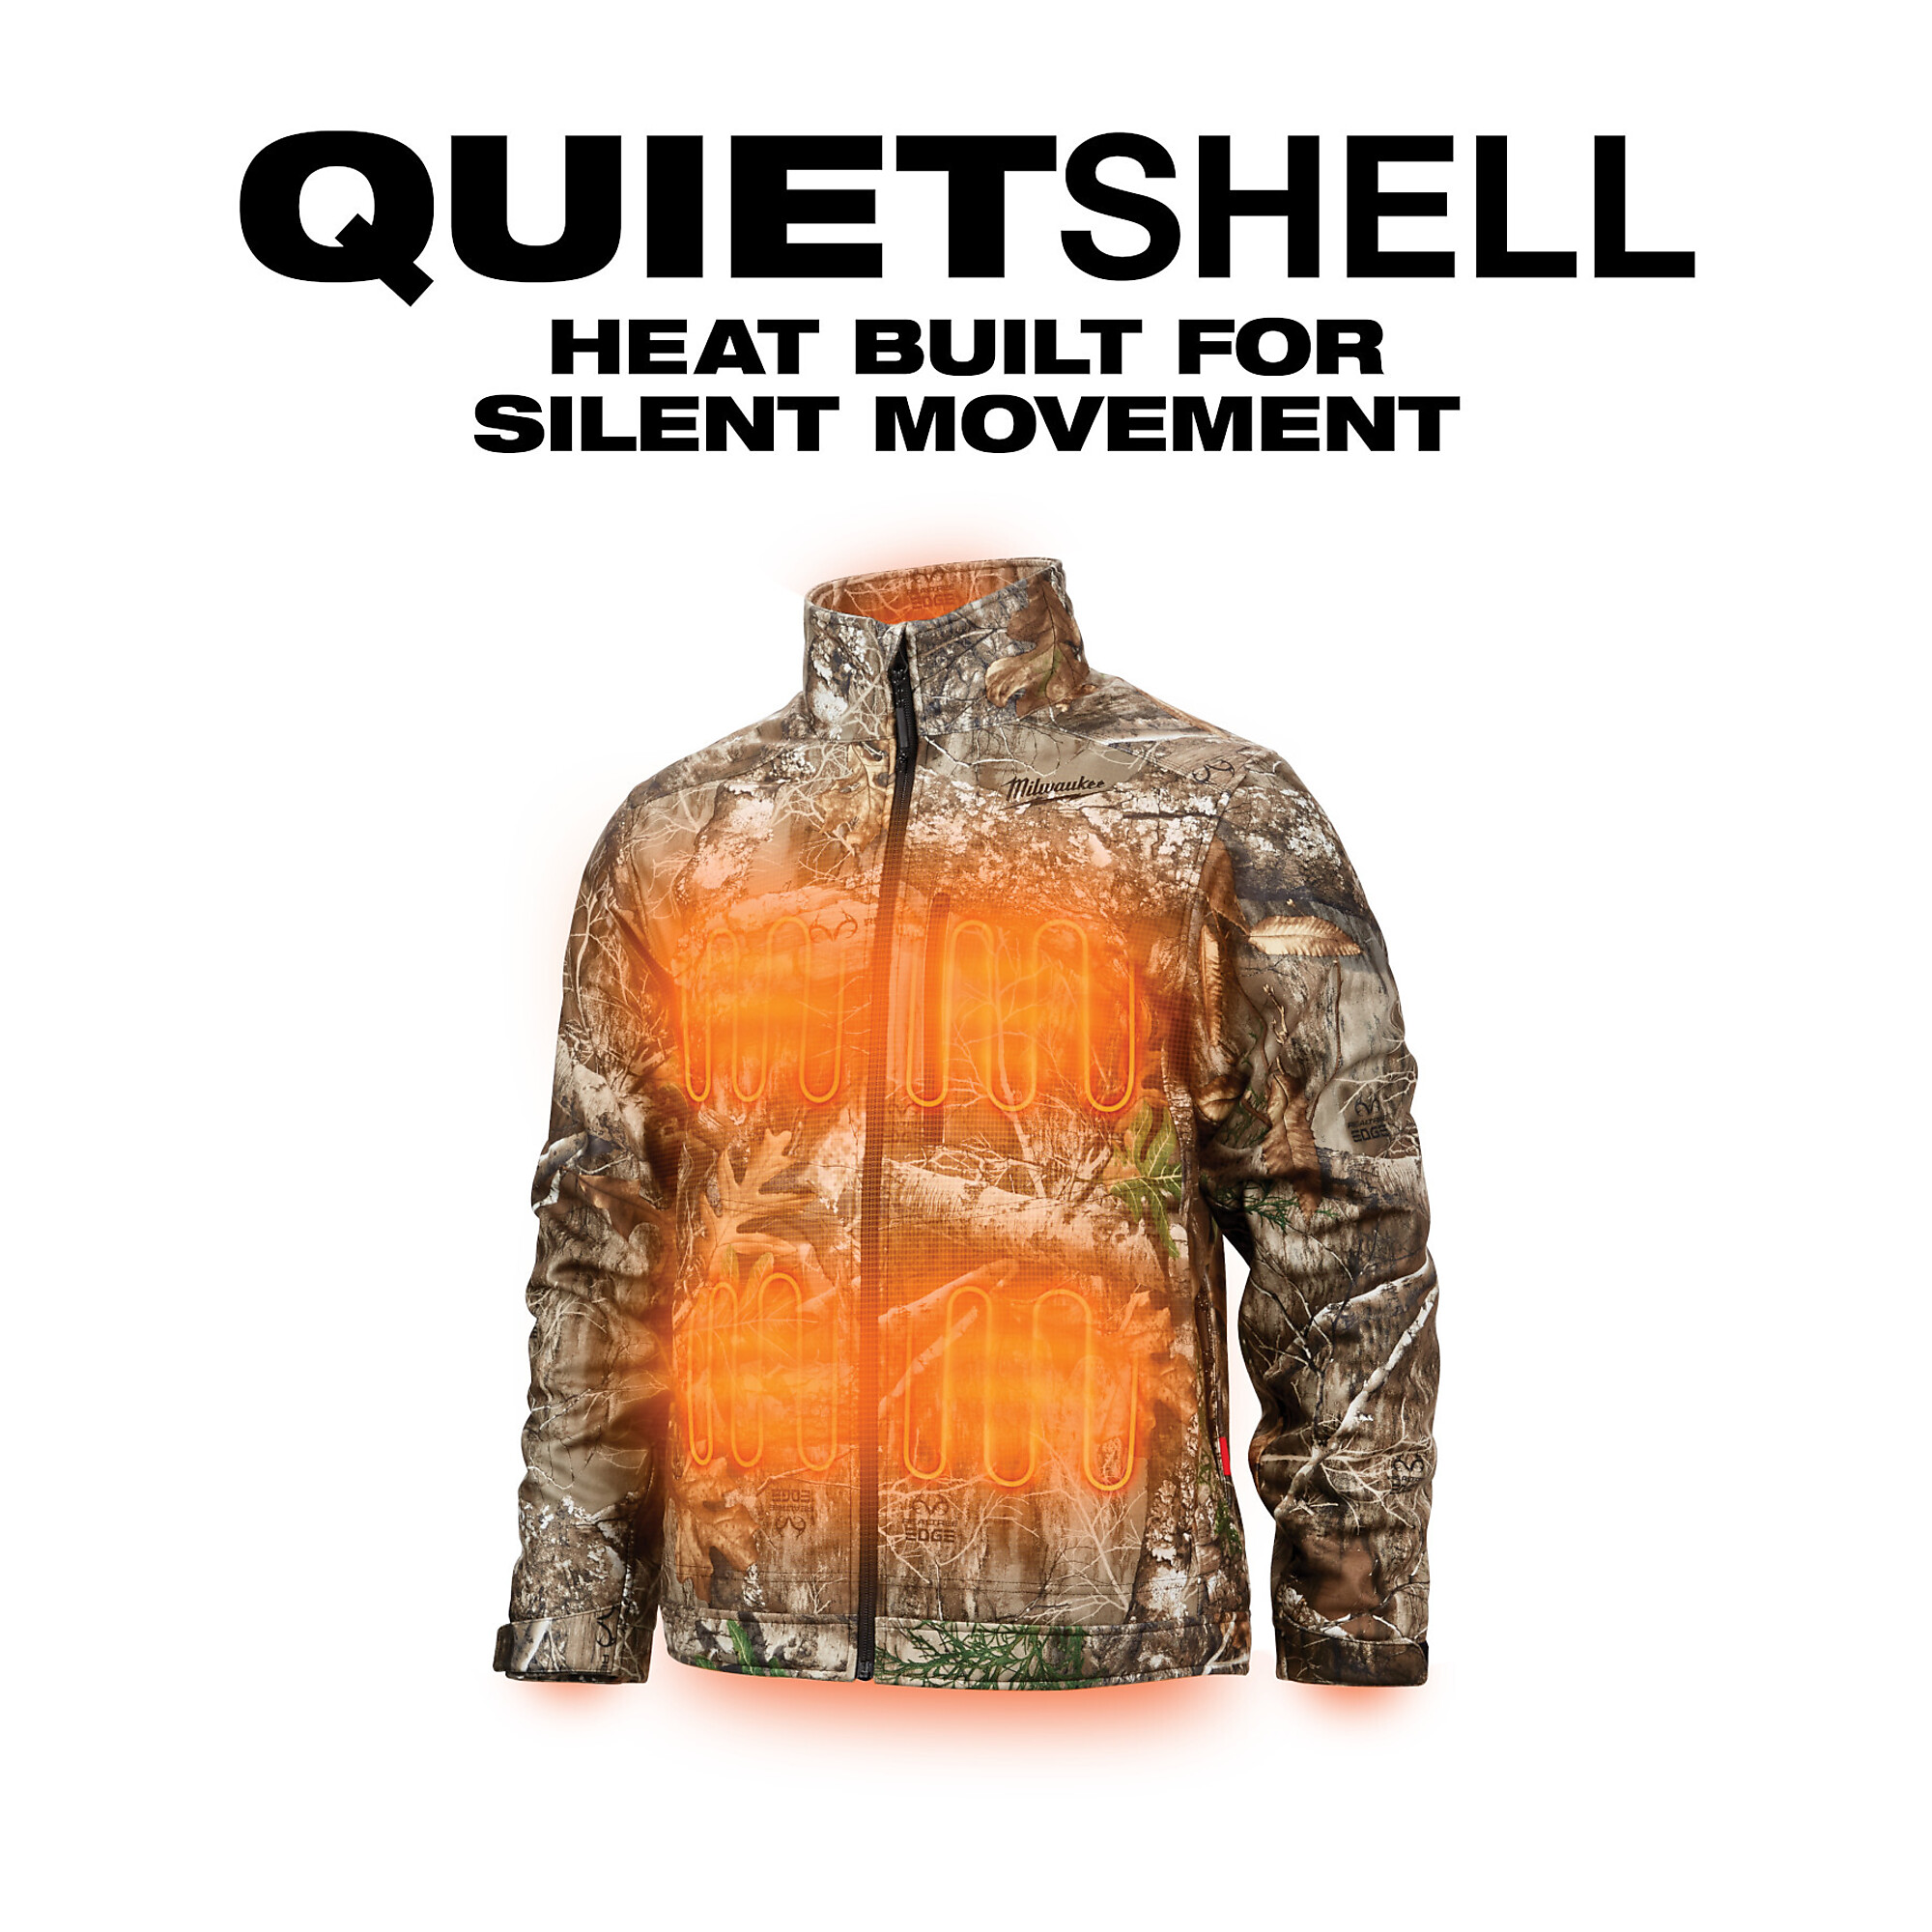 Milwaukee, M12 Heated Quietshell Jacket Kit Realtree, Size L, Color Camo, Model 224C-21L